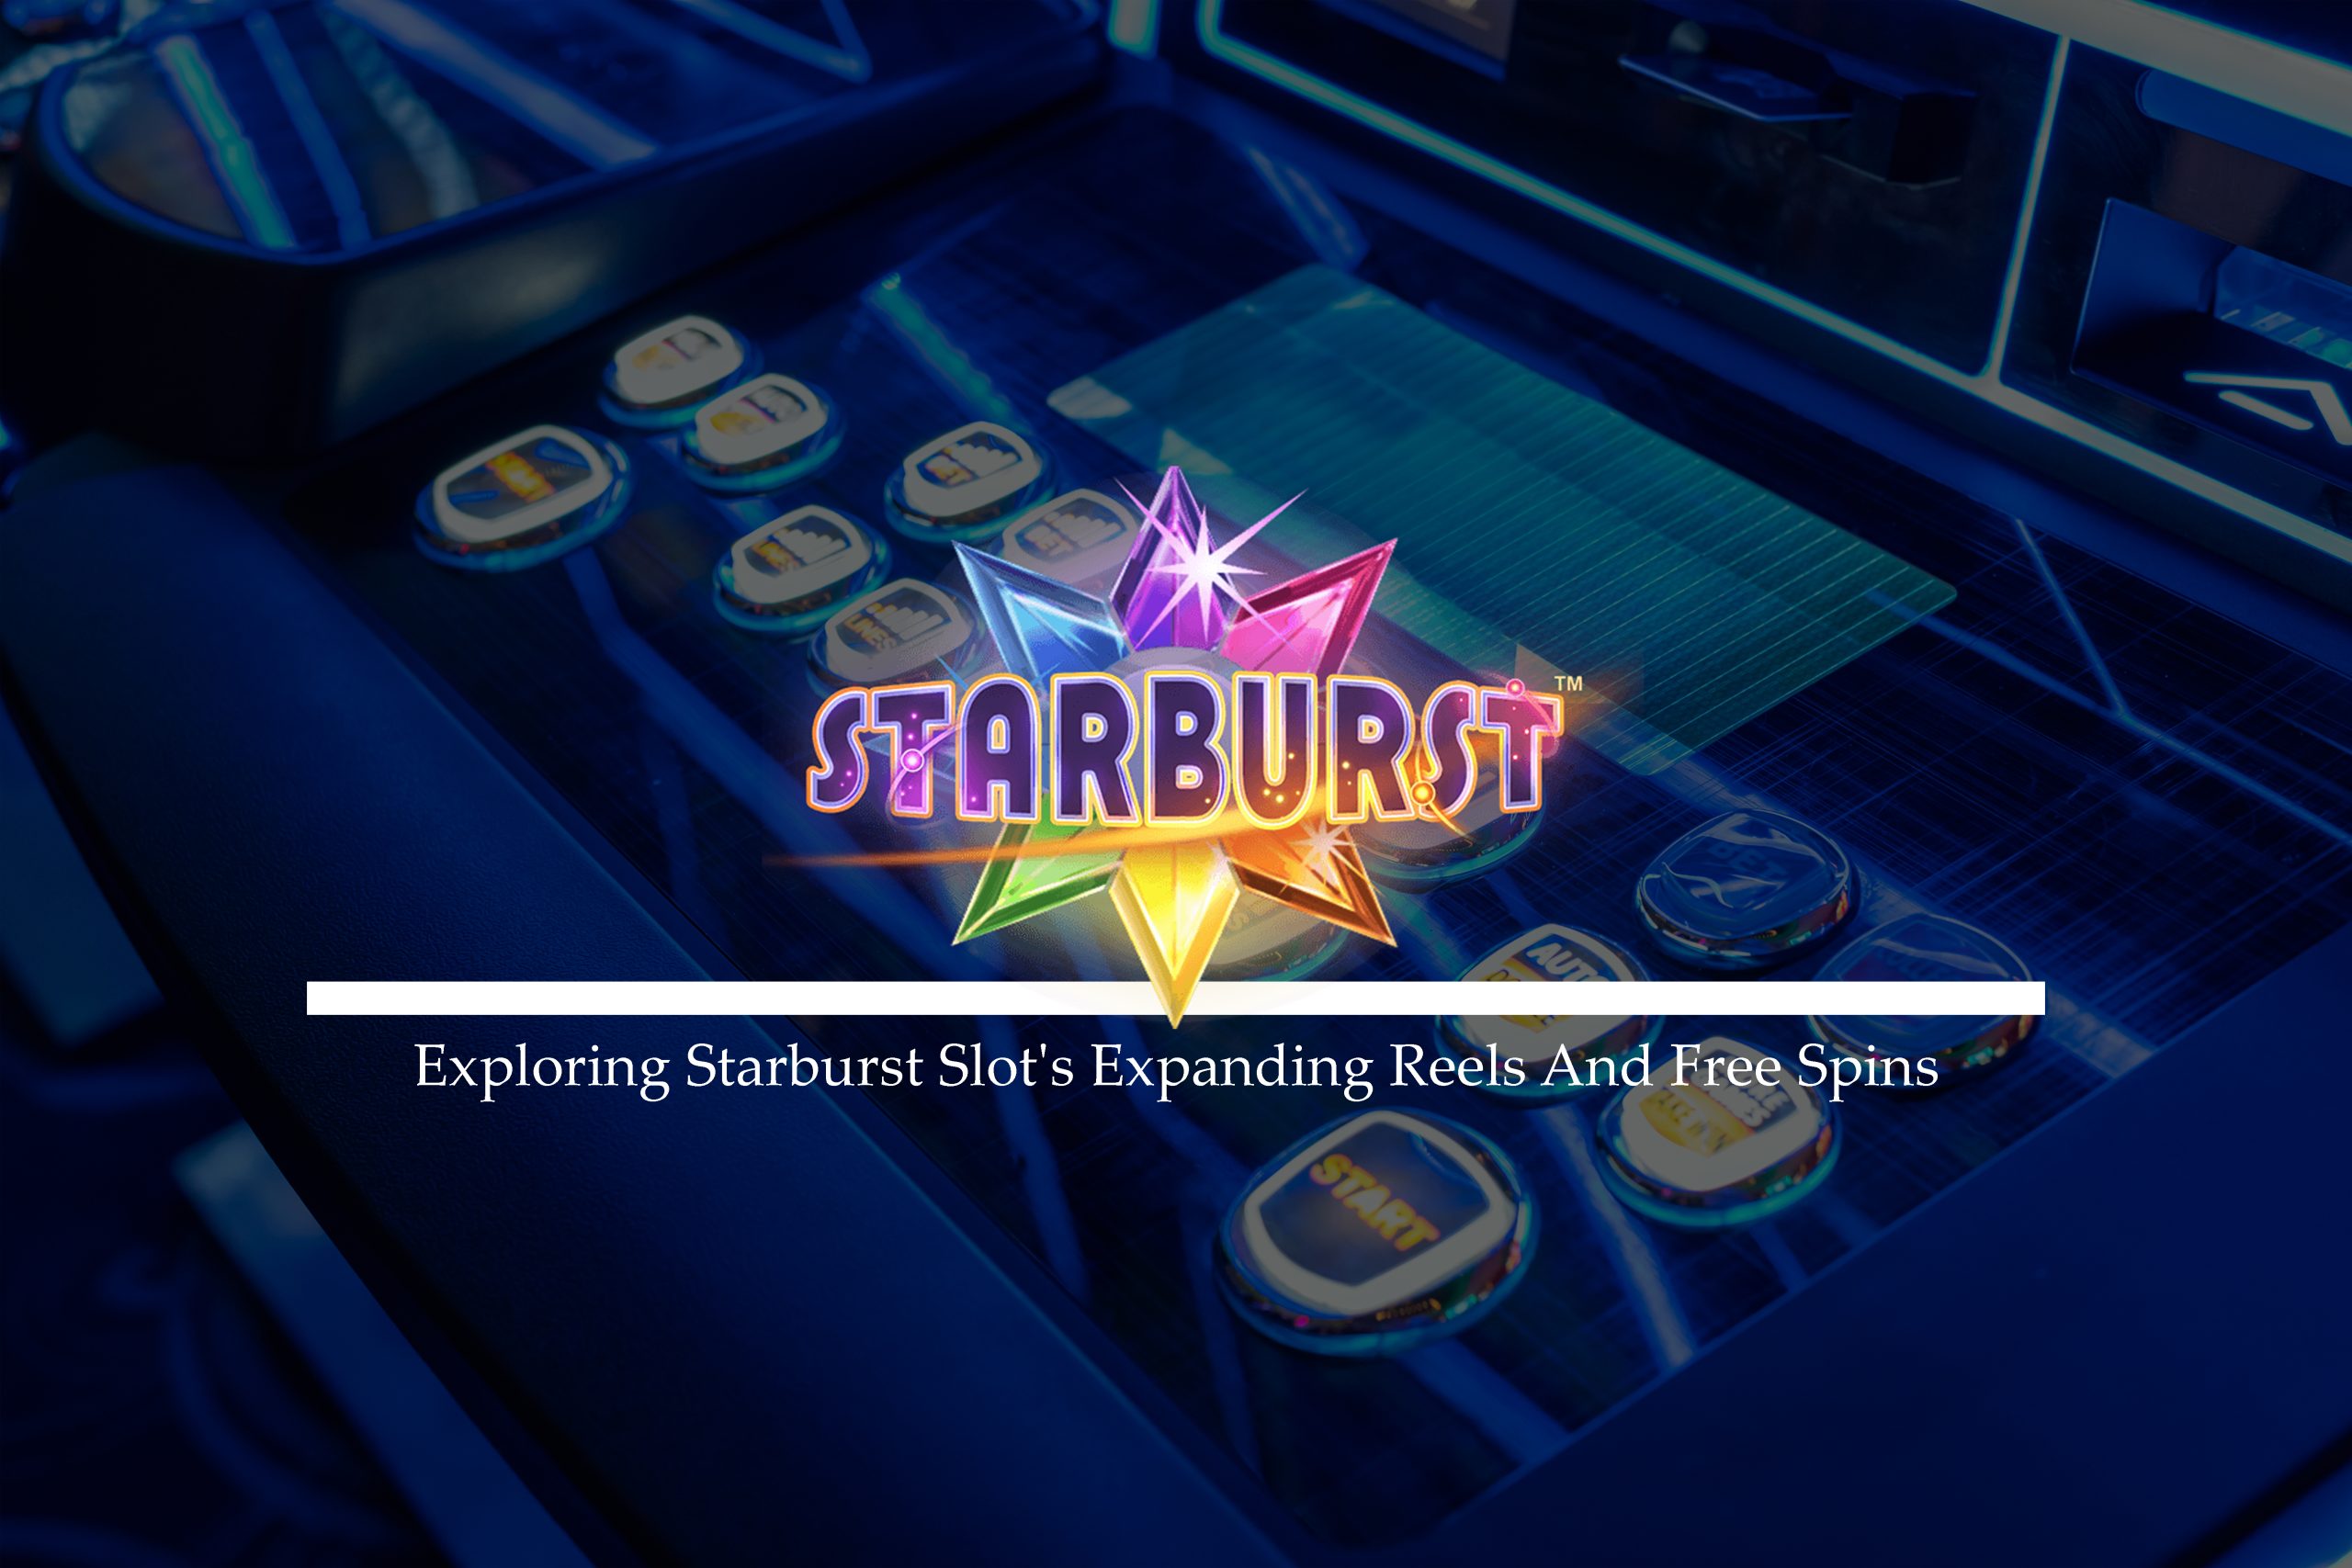 Exploring Starburst Slot's Expanding Reels And Free Spins